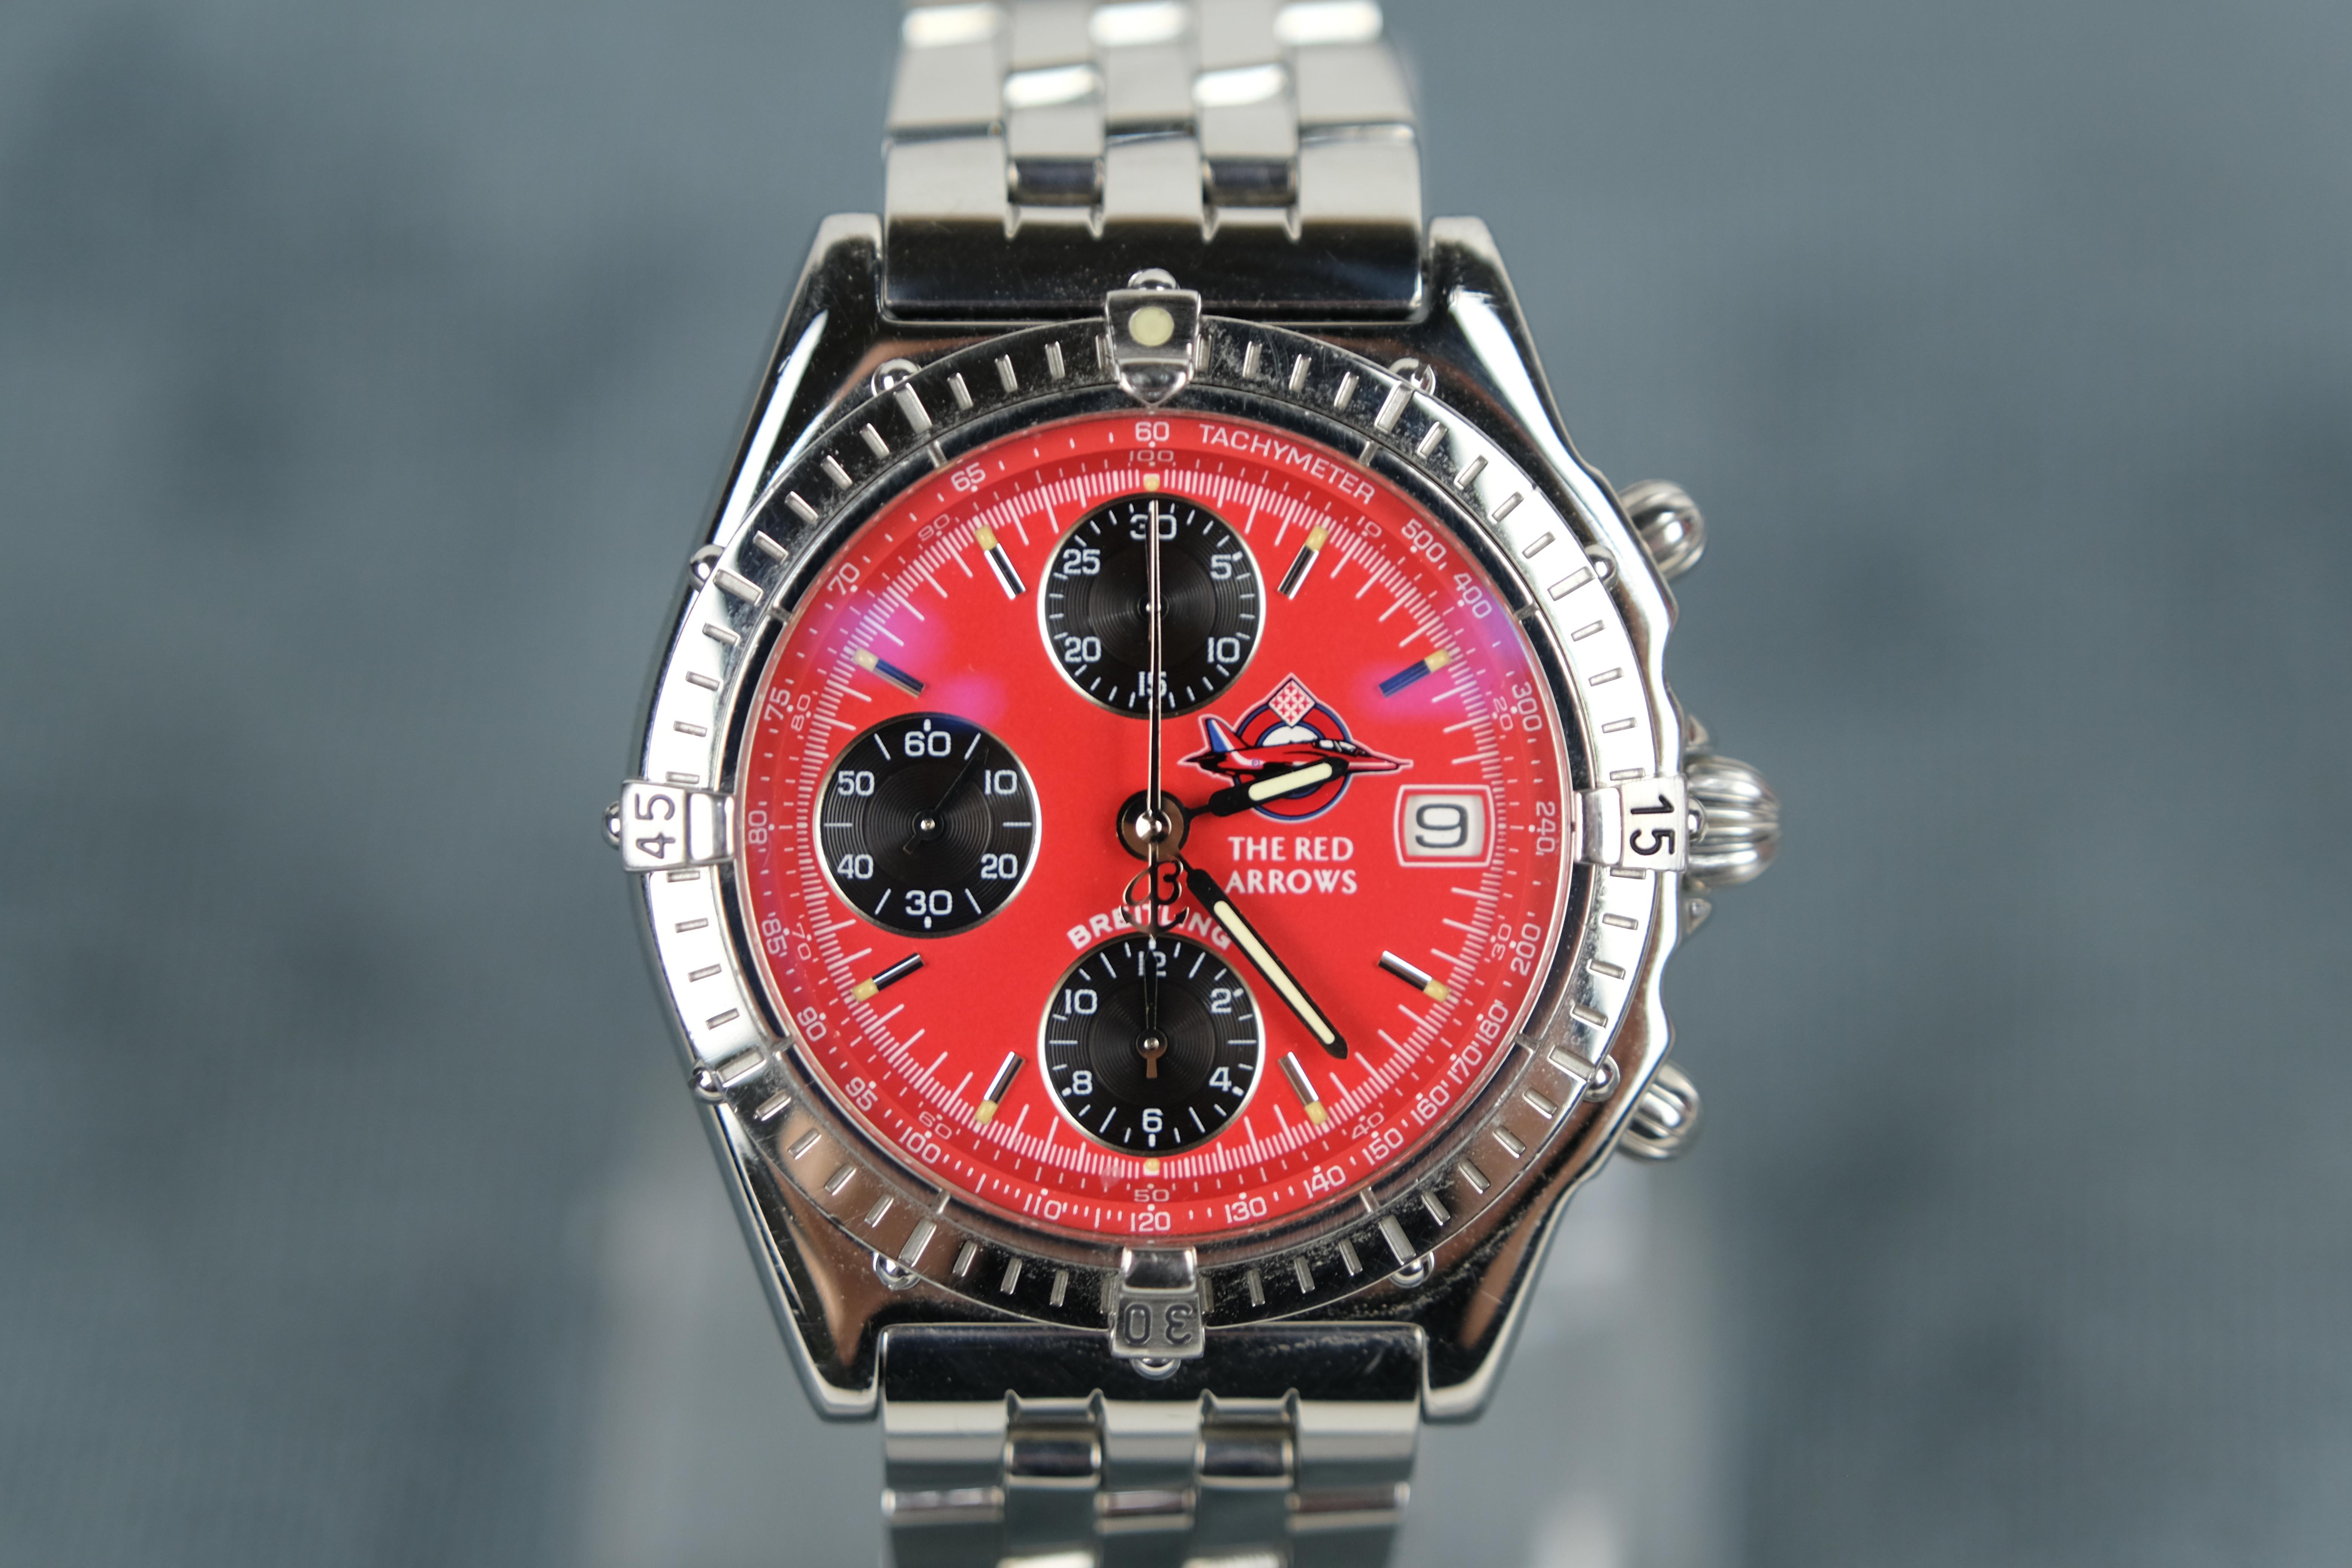 Breitling Chronomat Red Arrows Limited Edition.

I am a pilot. Not a commercial pilot, a private pilot. I became a pilot to realize a lifelong ambition. From being a small child when my mother was sure I was a reincarnated First World War fighter